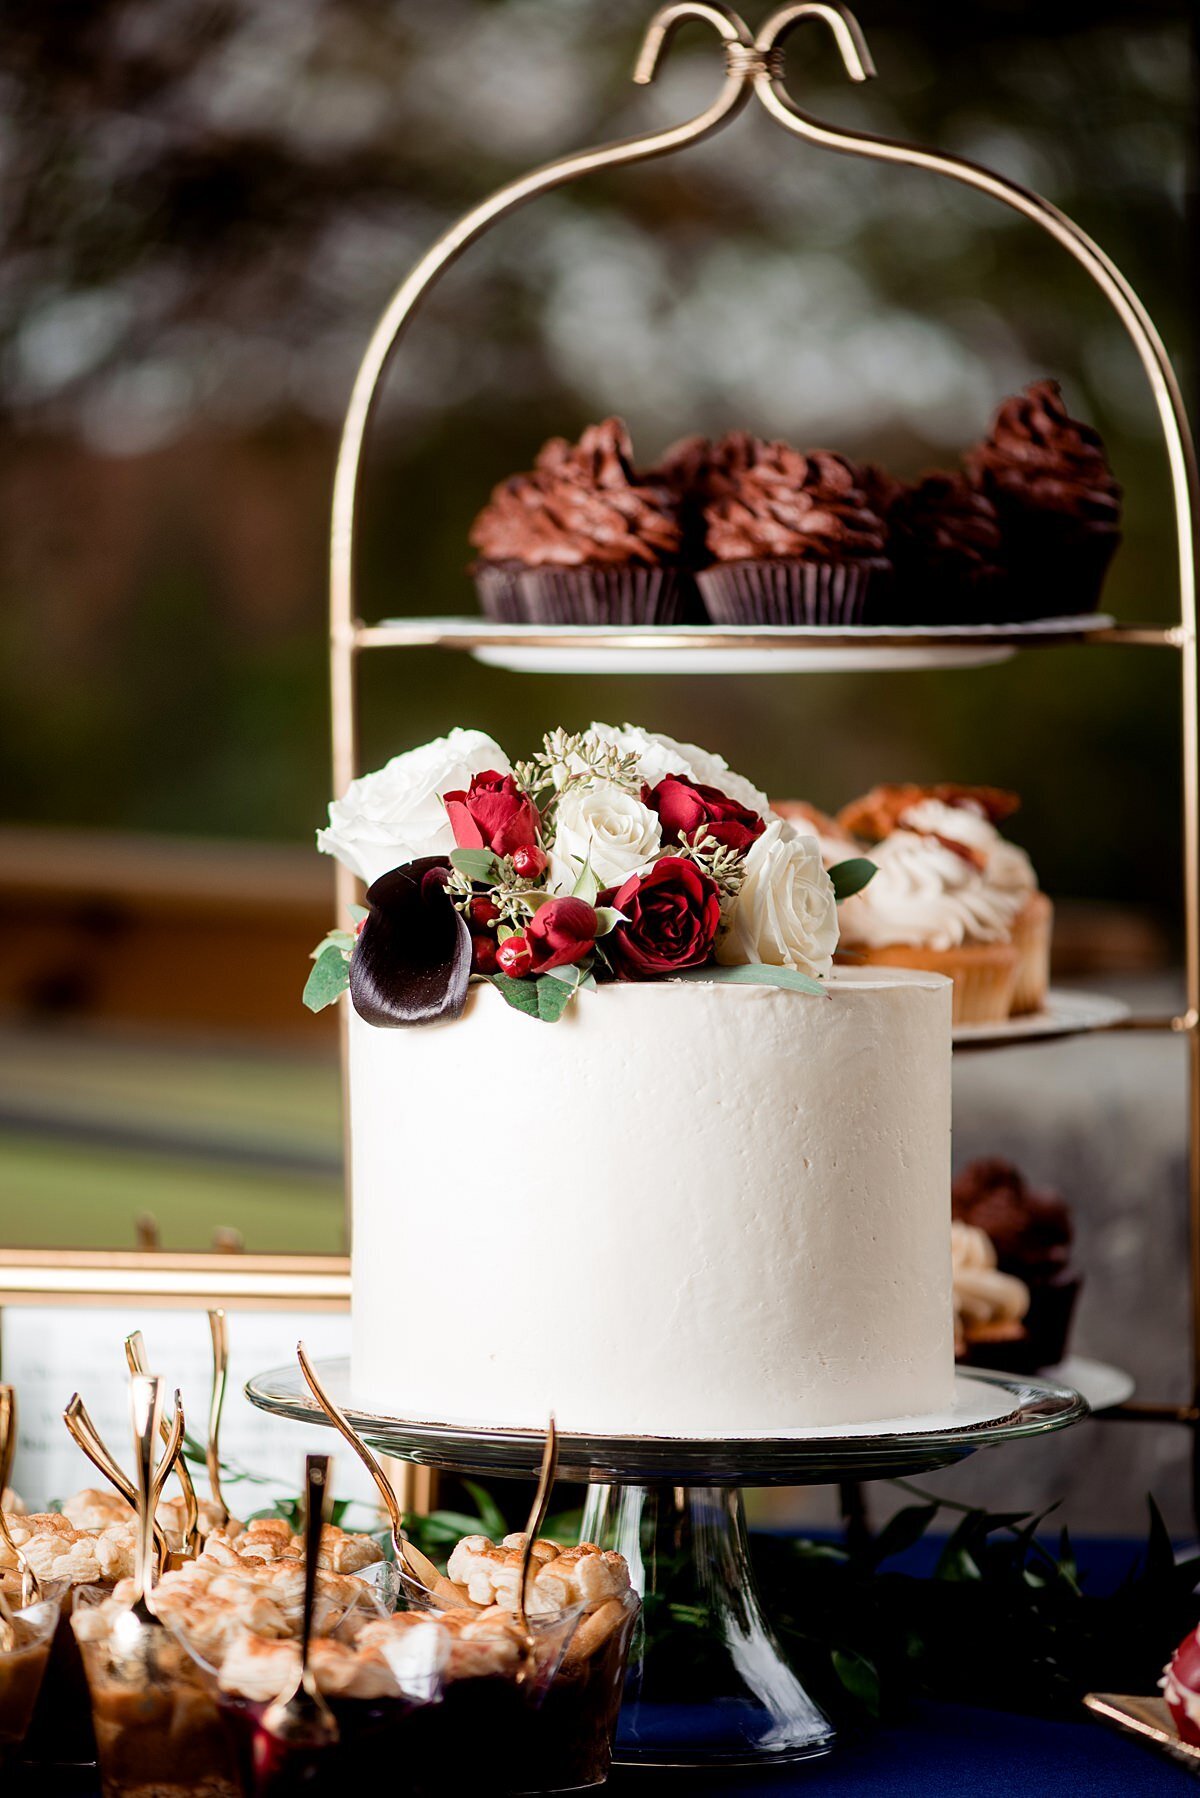 Small white wedding cake topped with white and red roses on a footed silver cake stand. Behind the cake is a three tier dessert stand with assorted cupcakes. In front of the cake are small dessert shooters.